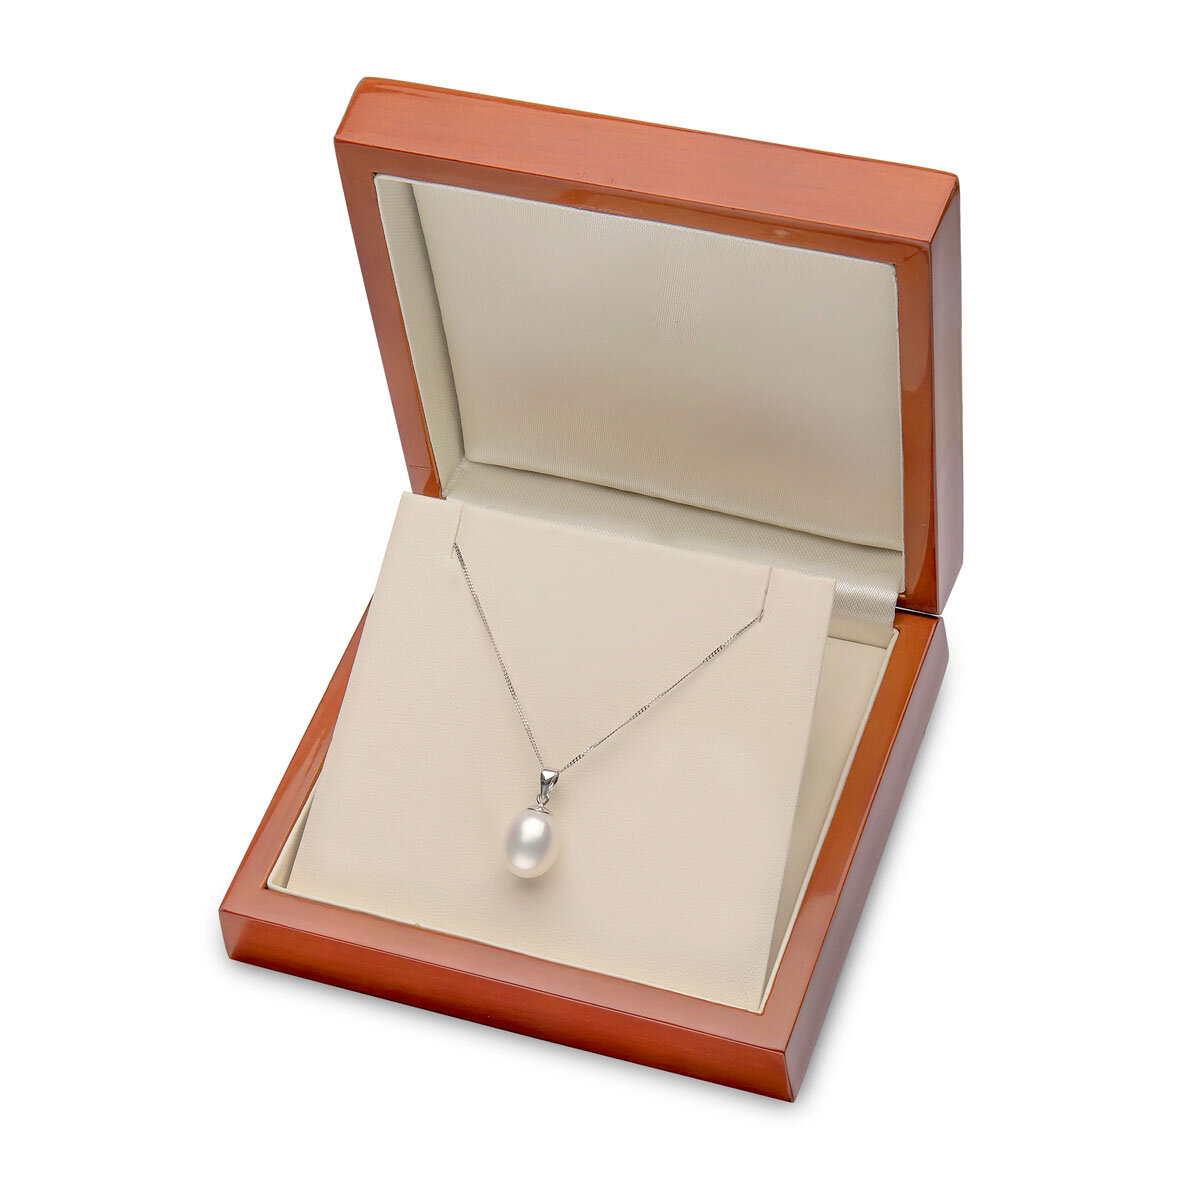 9mm Pearl Pendant, 18ct White Gold